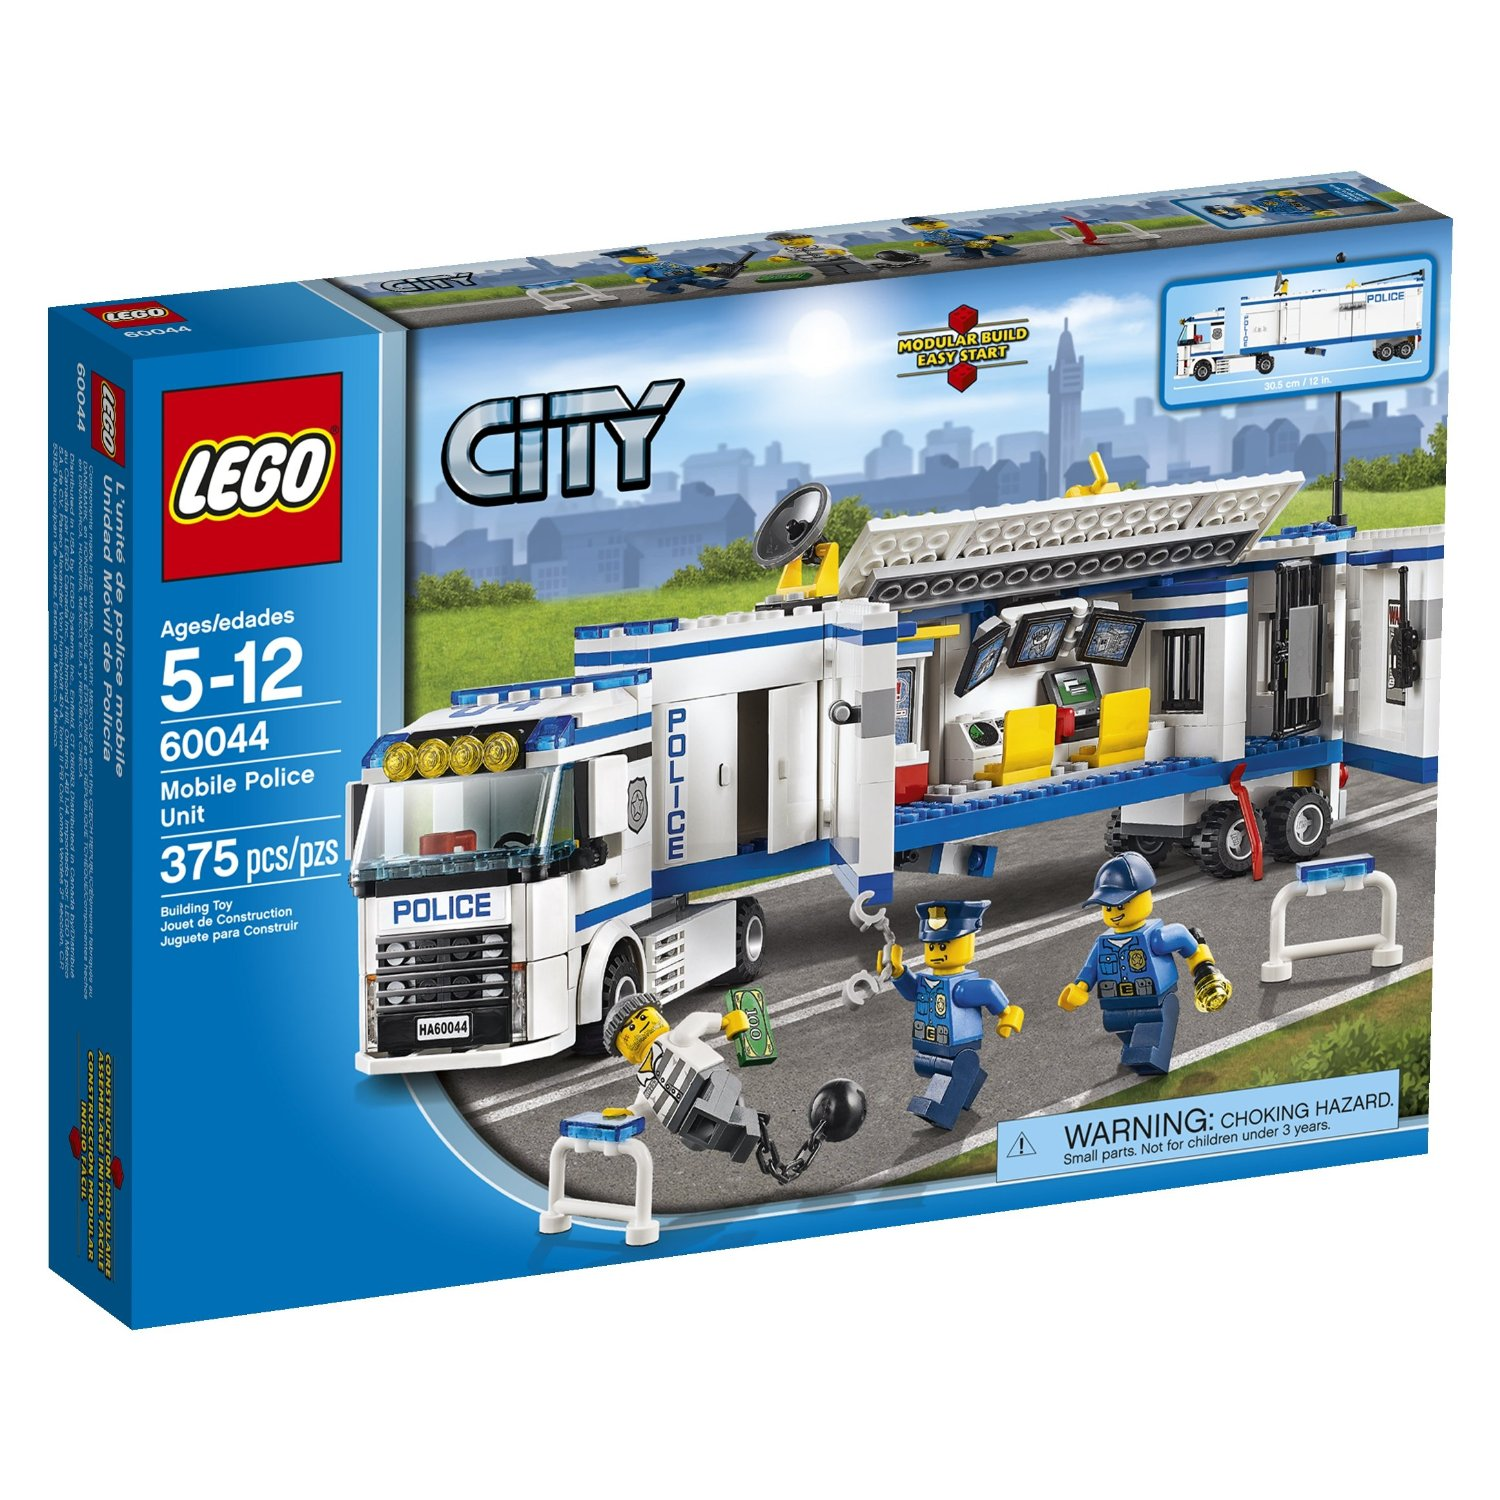 Amazon: LEGO City Police 60044 Mobile Police Unit Only $29.24! A 35% Savings!